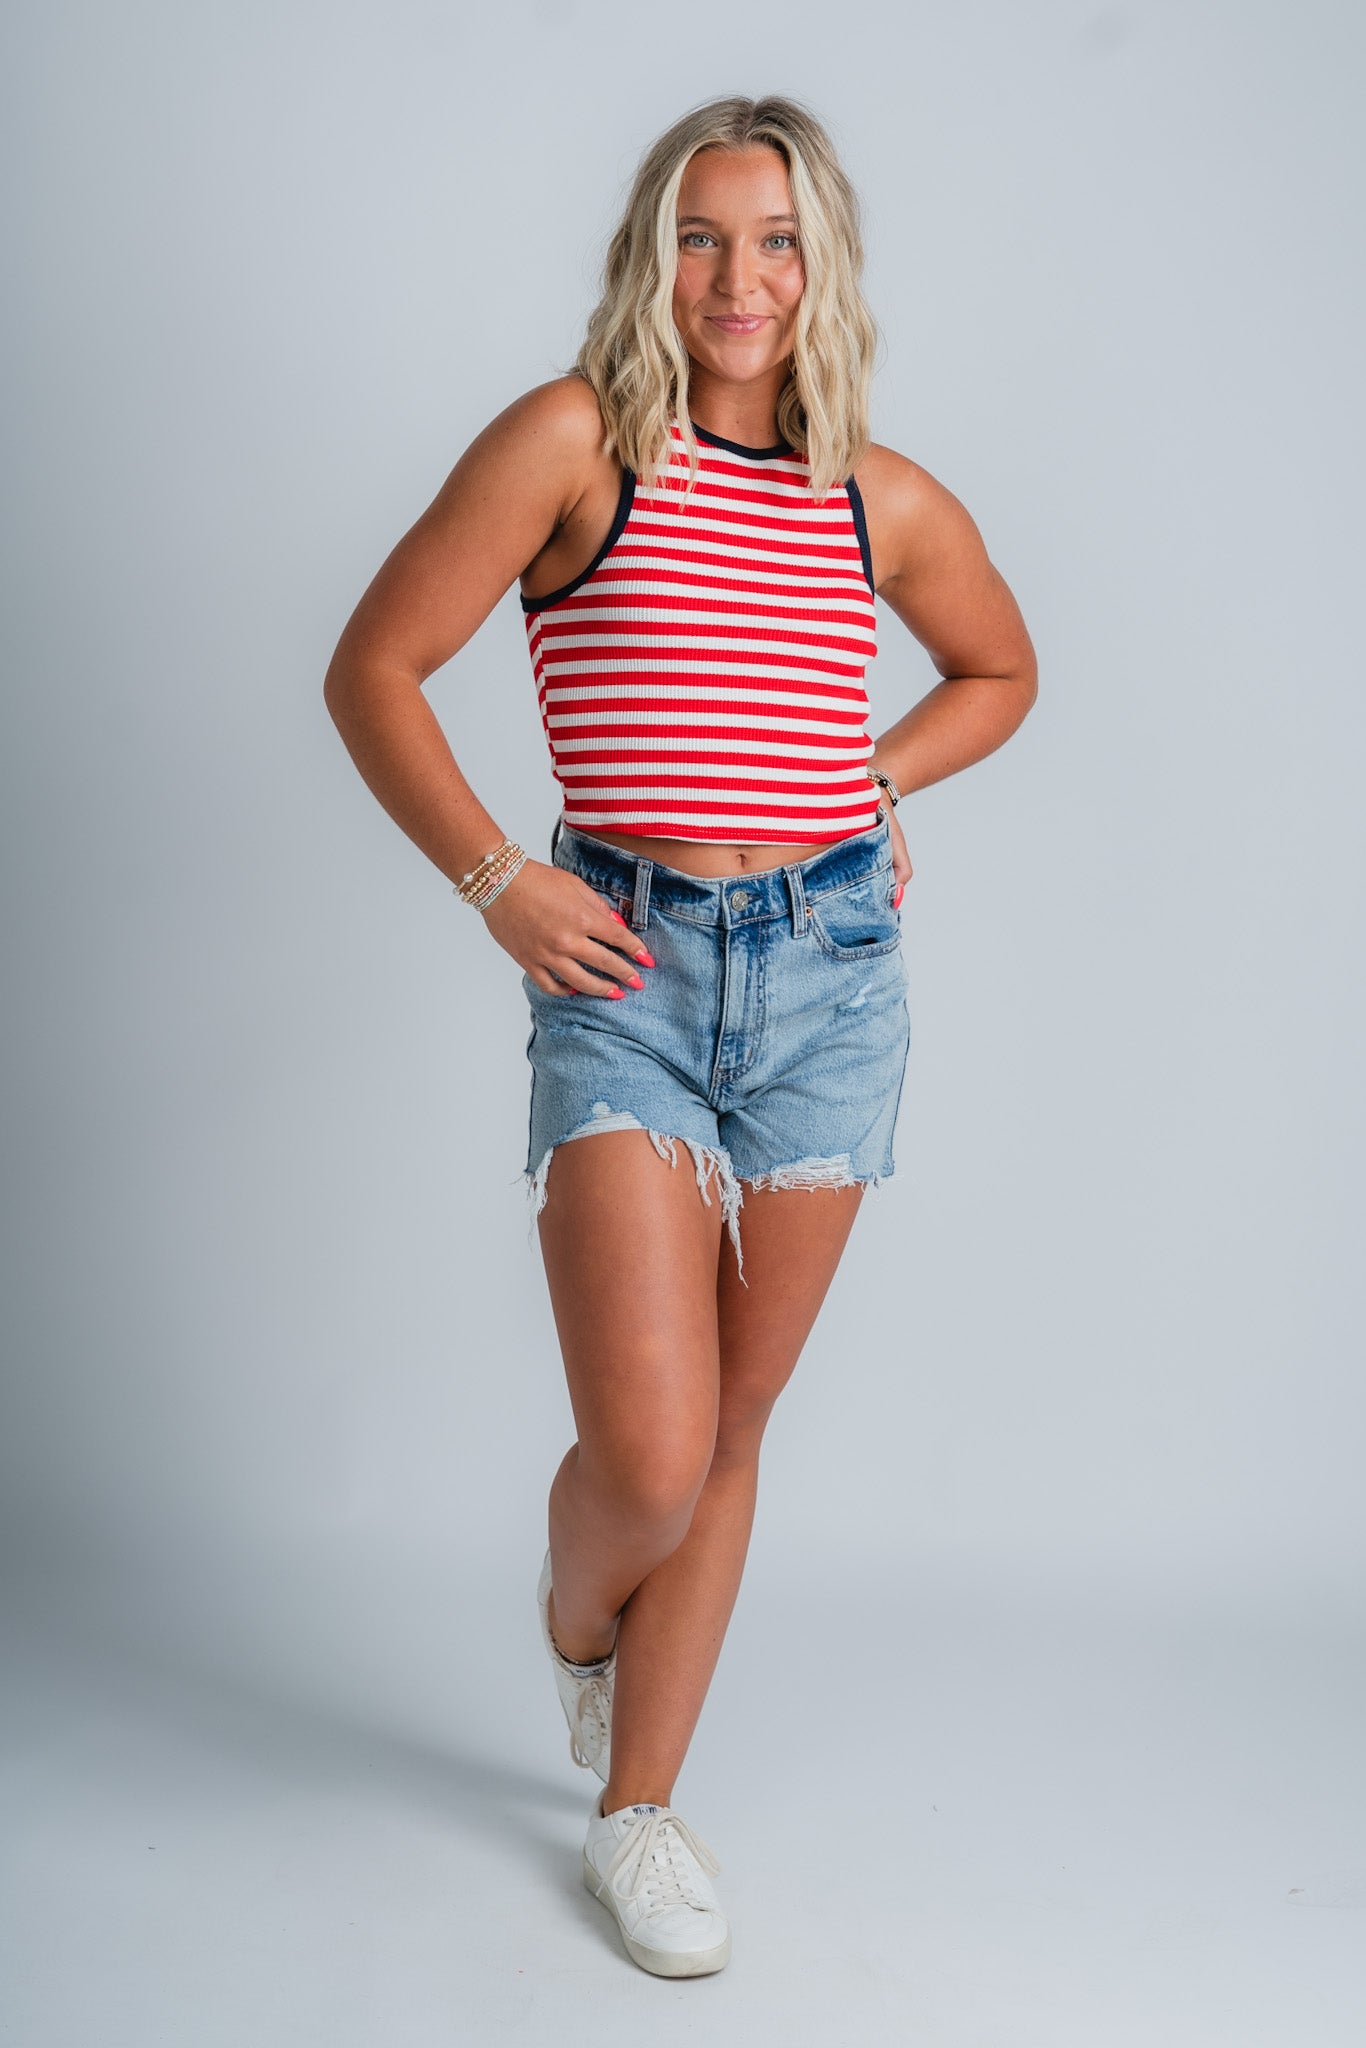 Red white and blue striped tank top - Stylish Tank Top - Trendy American Summer Fashion at Lush Fashion Lounge Boutique in Oklahoma